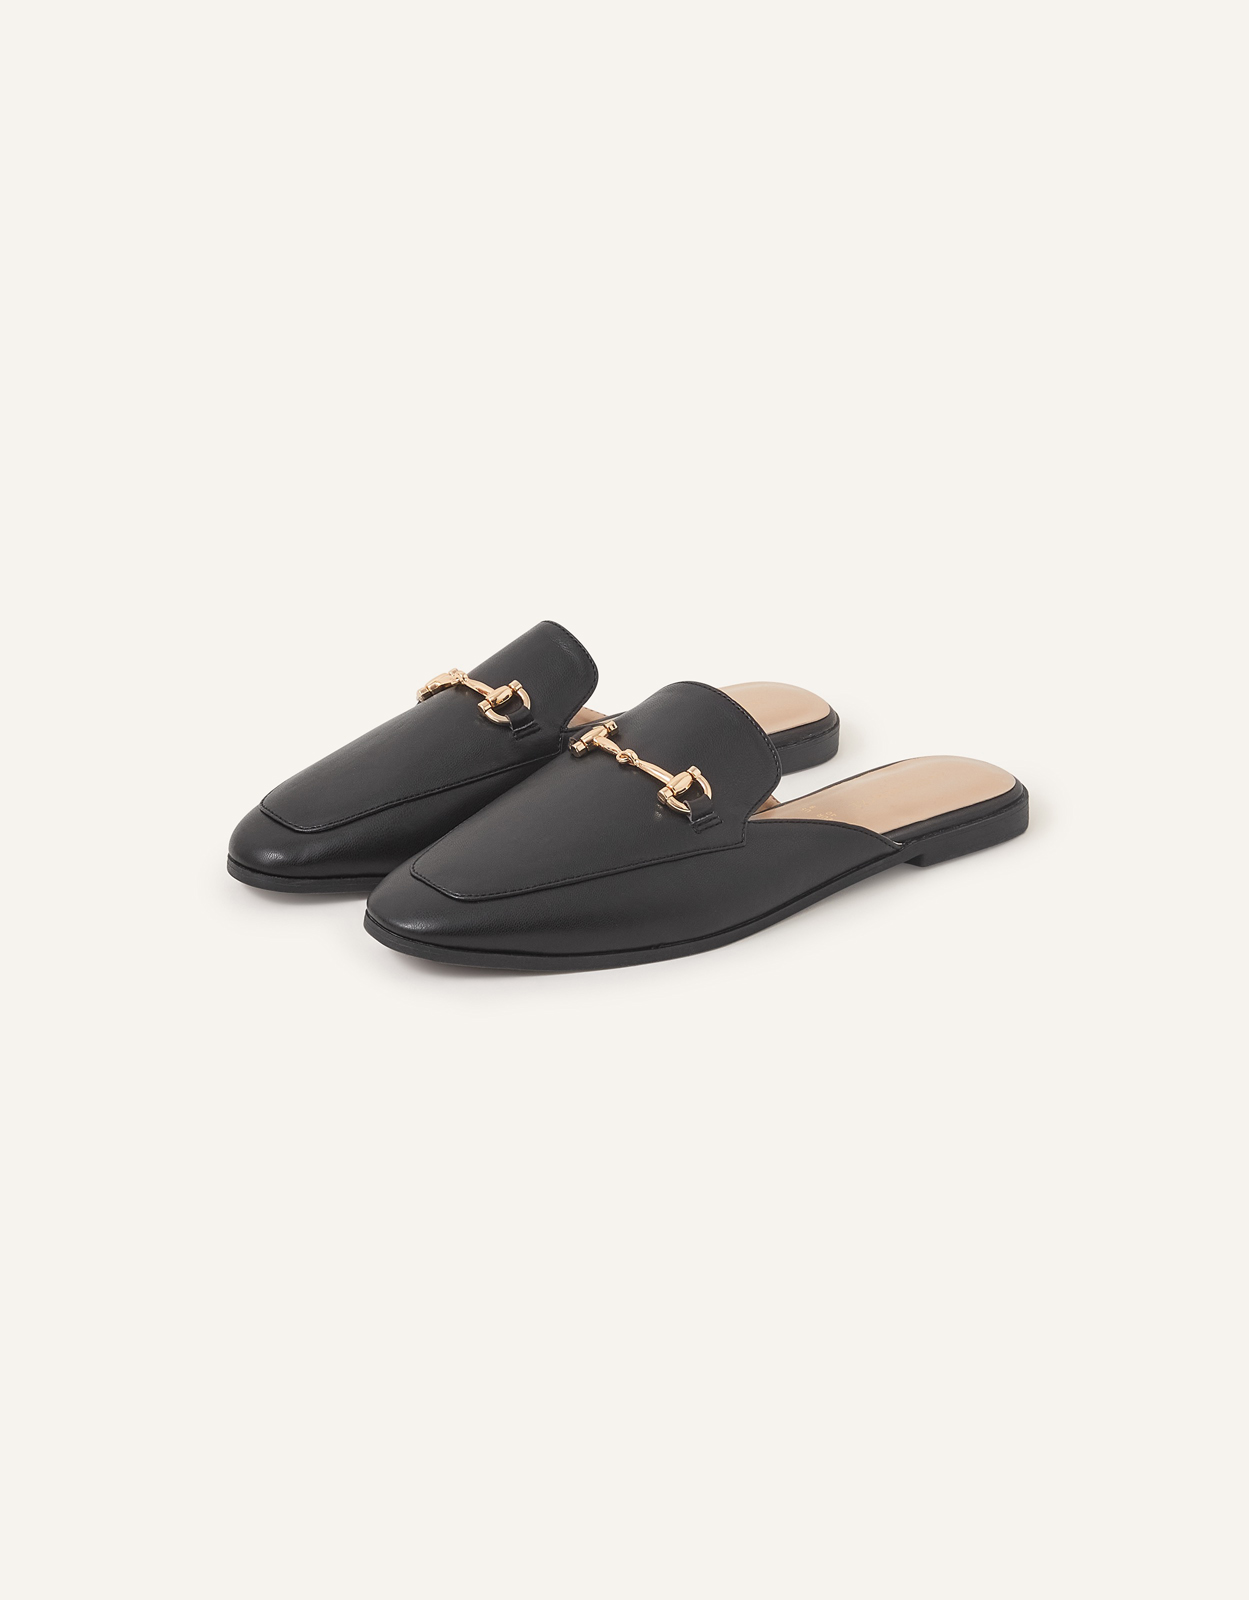 Accessorize Backless Loafers Black, Size: 39